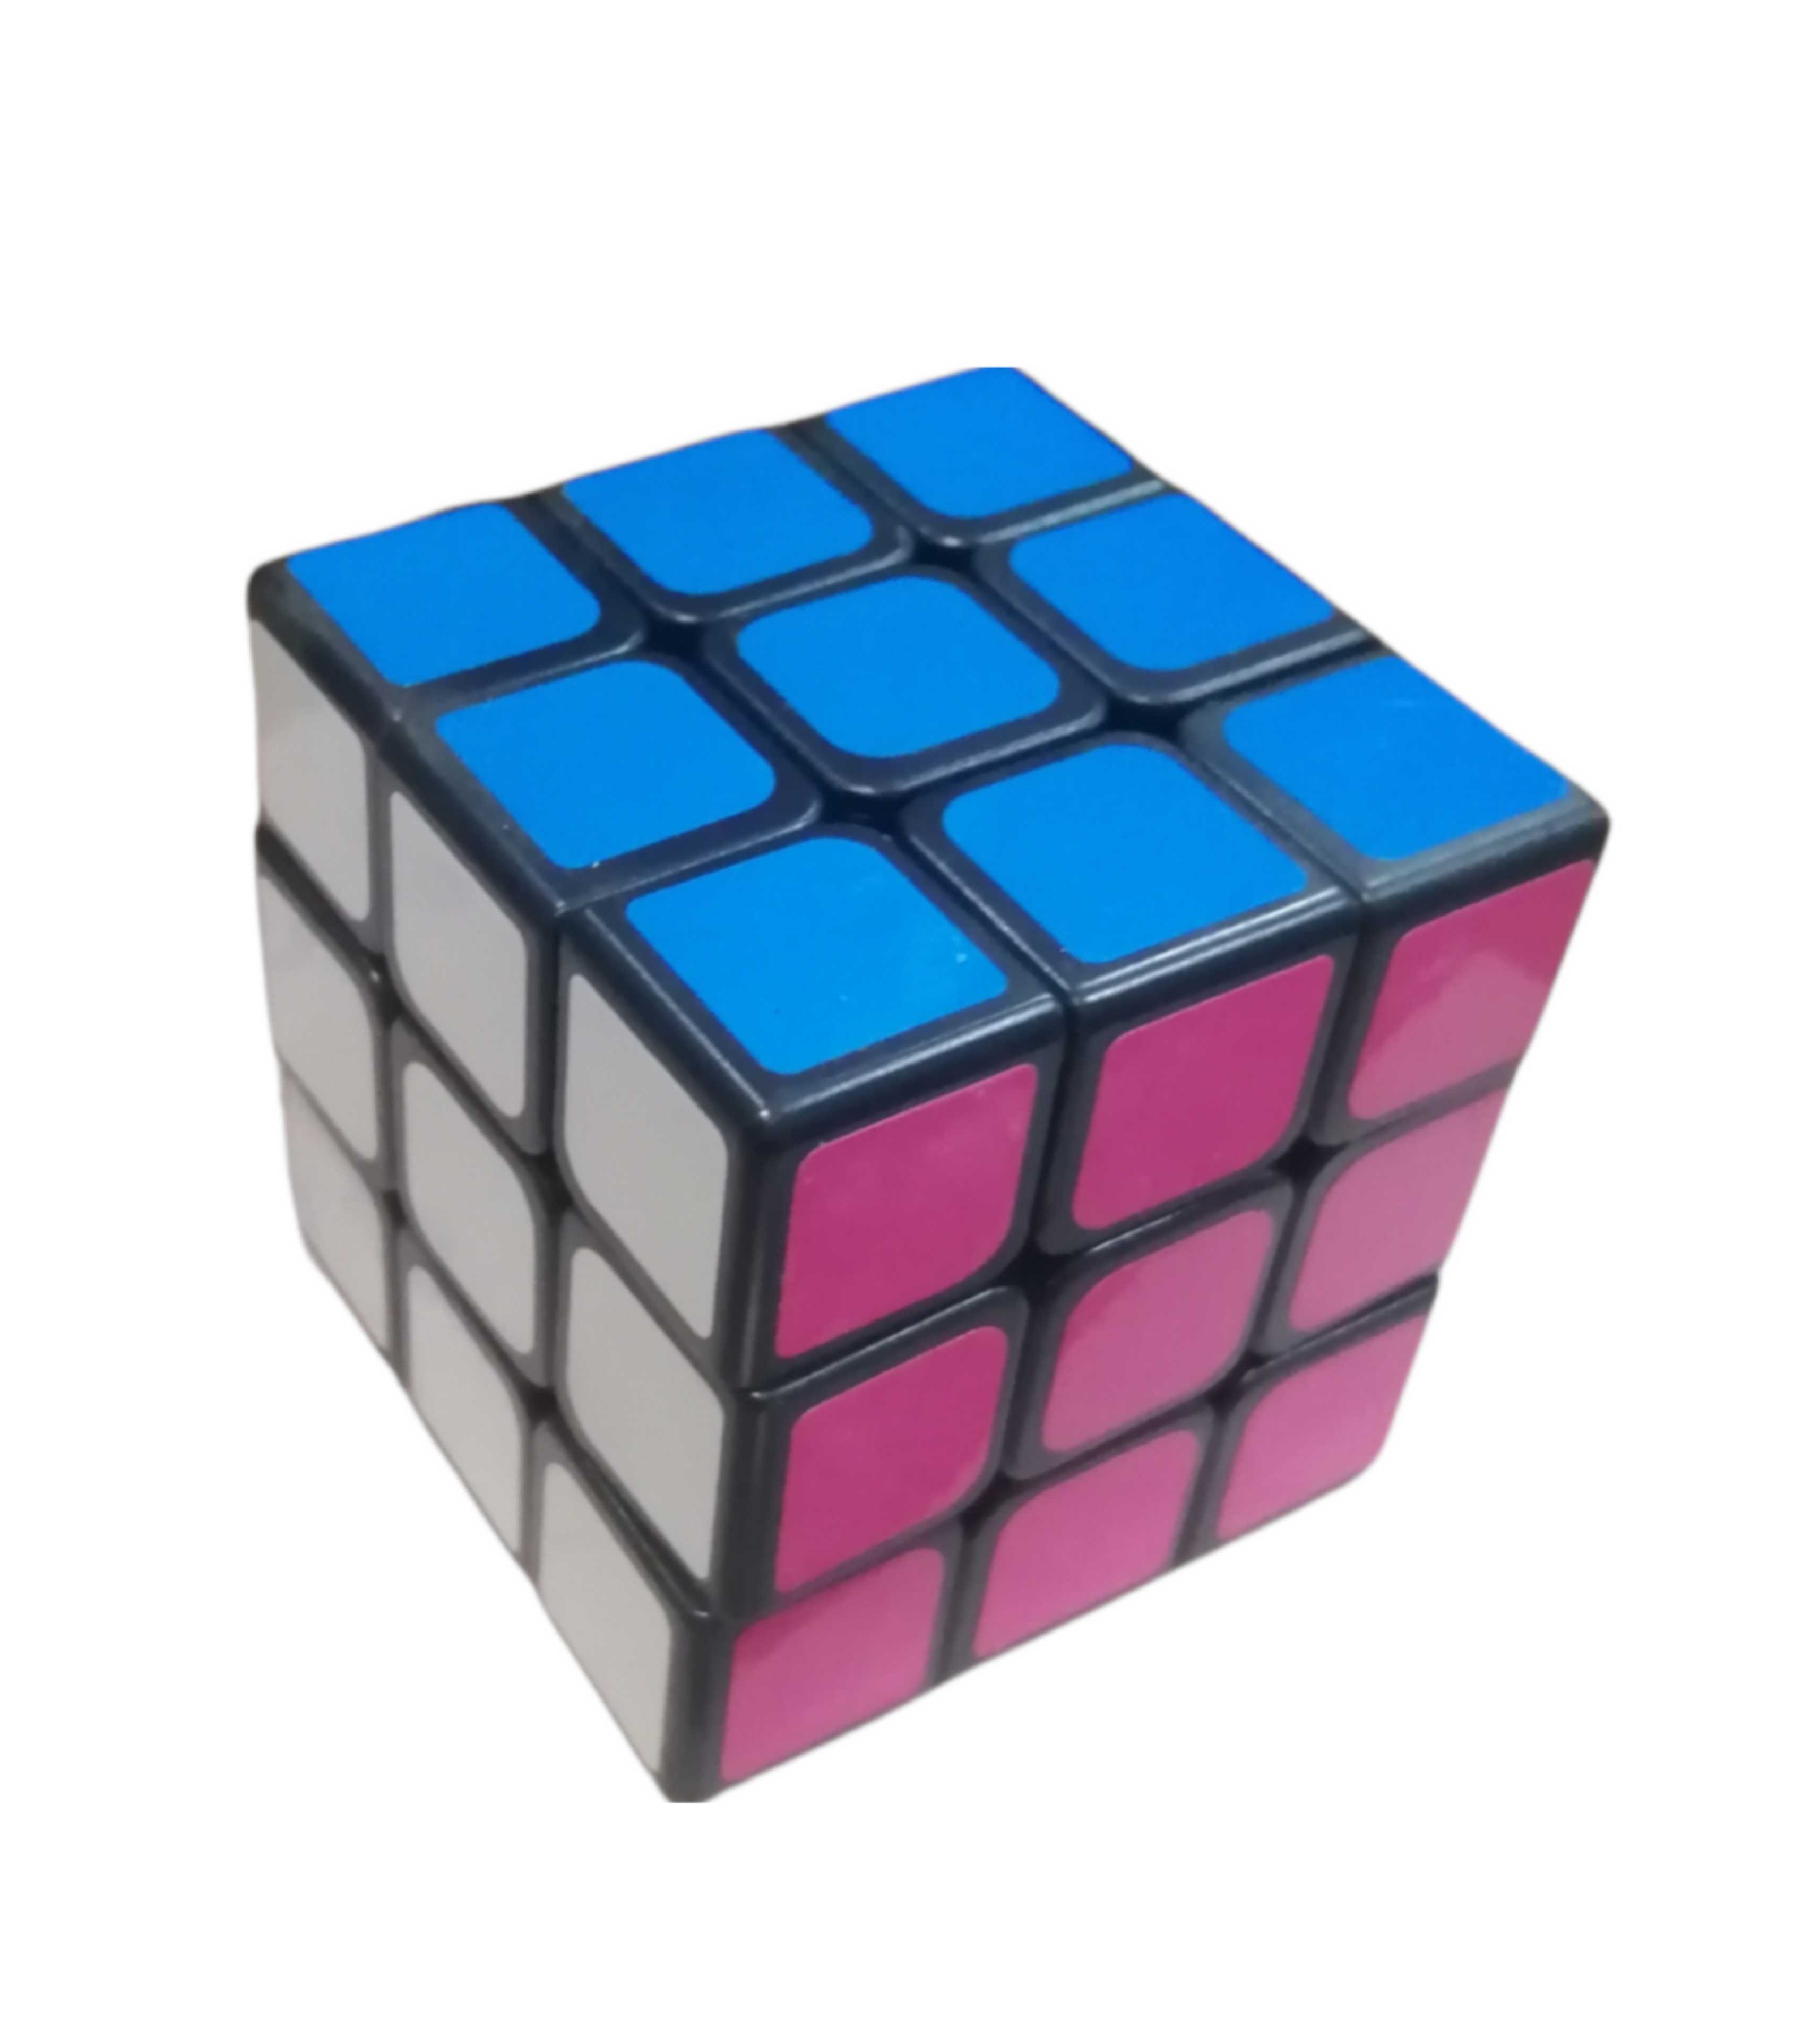 Cube game